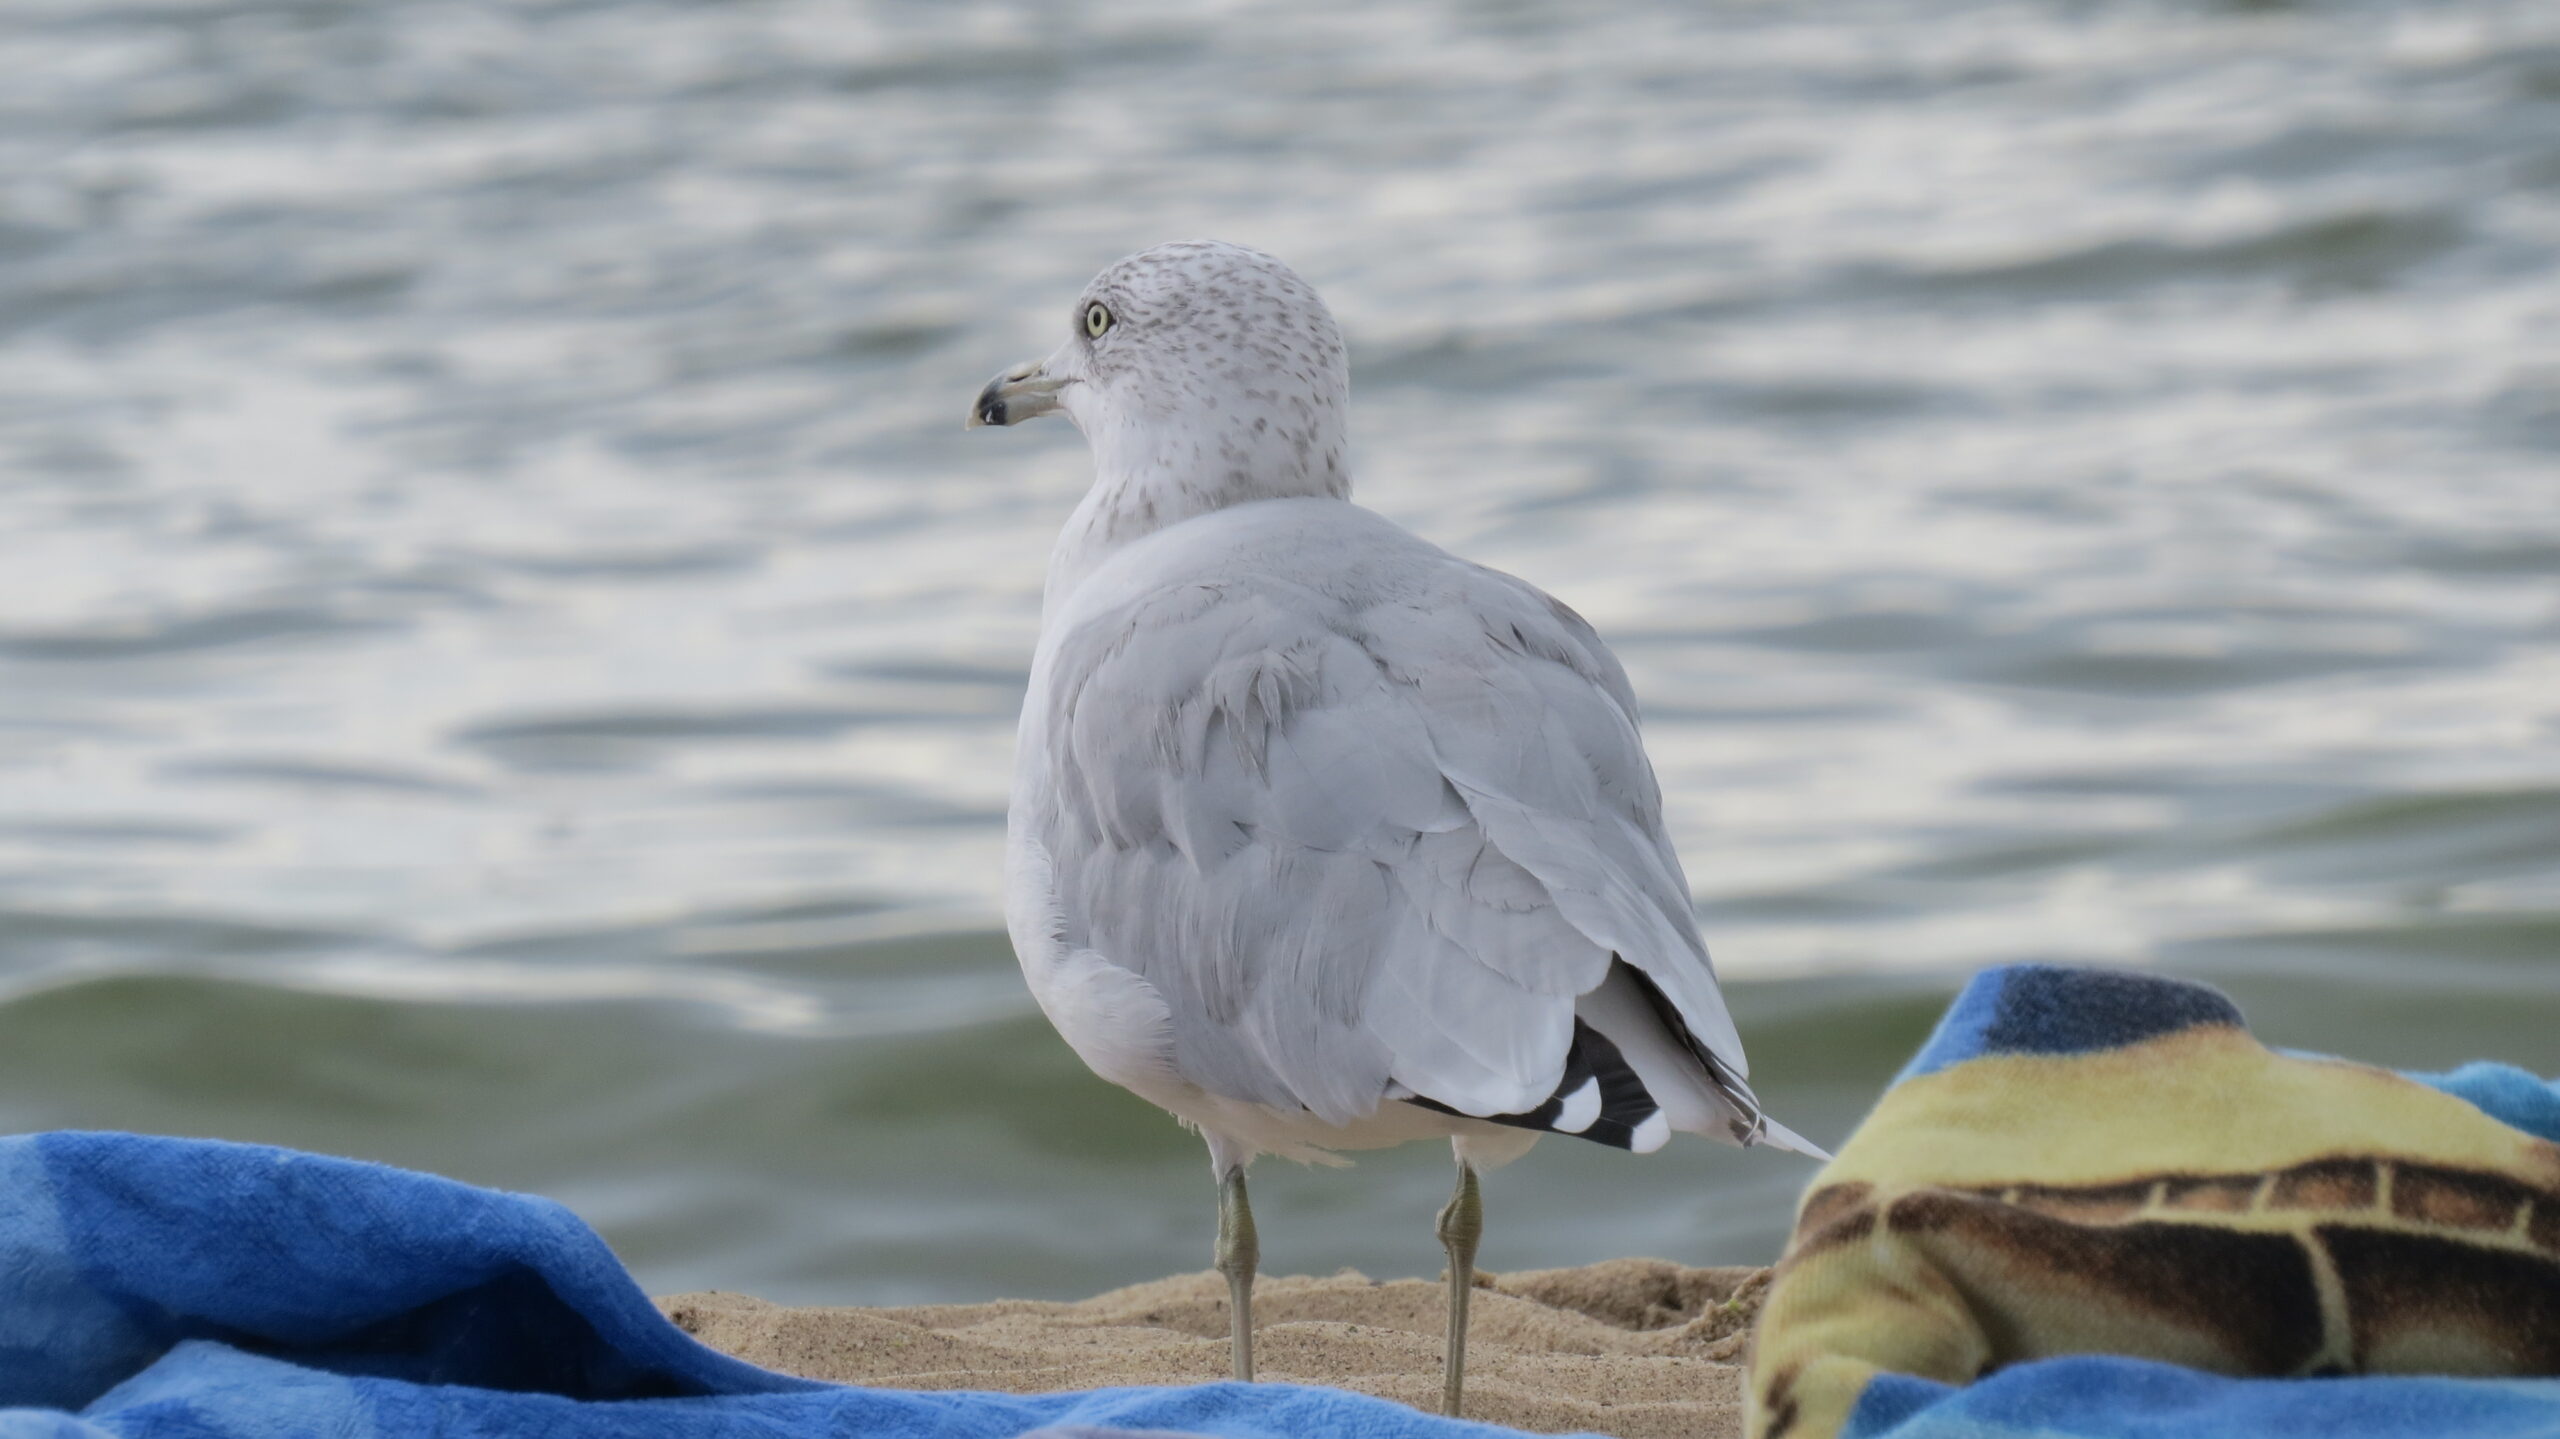 The photo titled "Ring-billed Gull" captures the eponymous bird on the shores of Lake Michigan in Saugatuck.